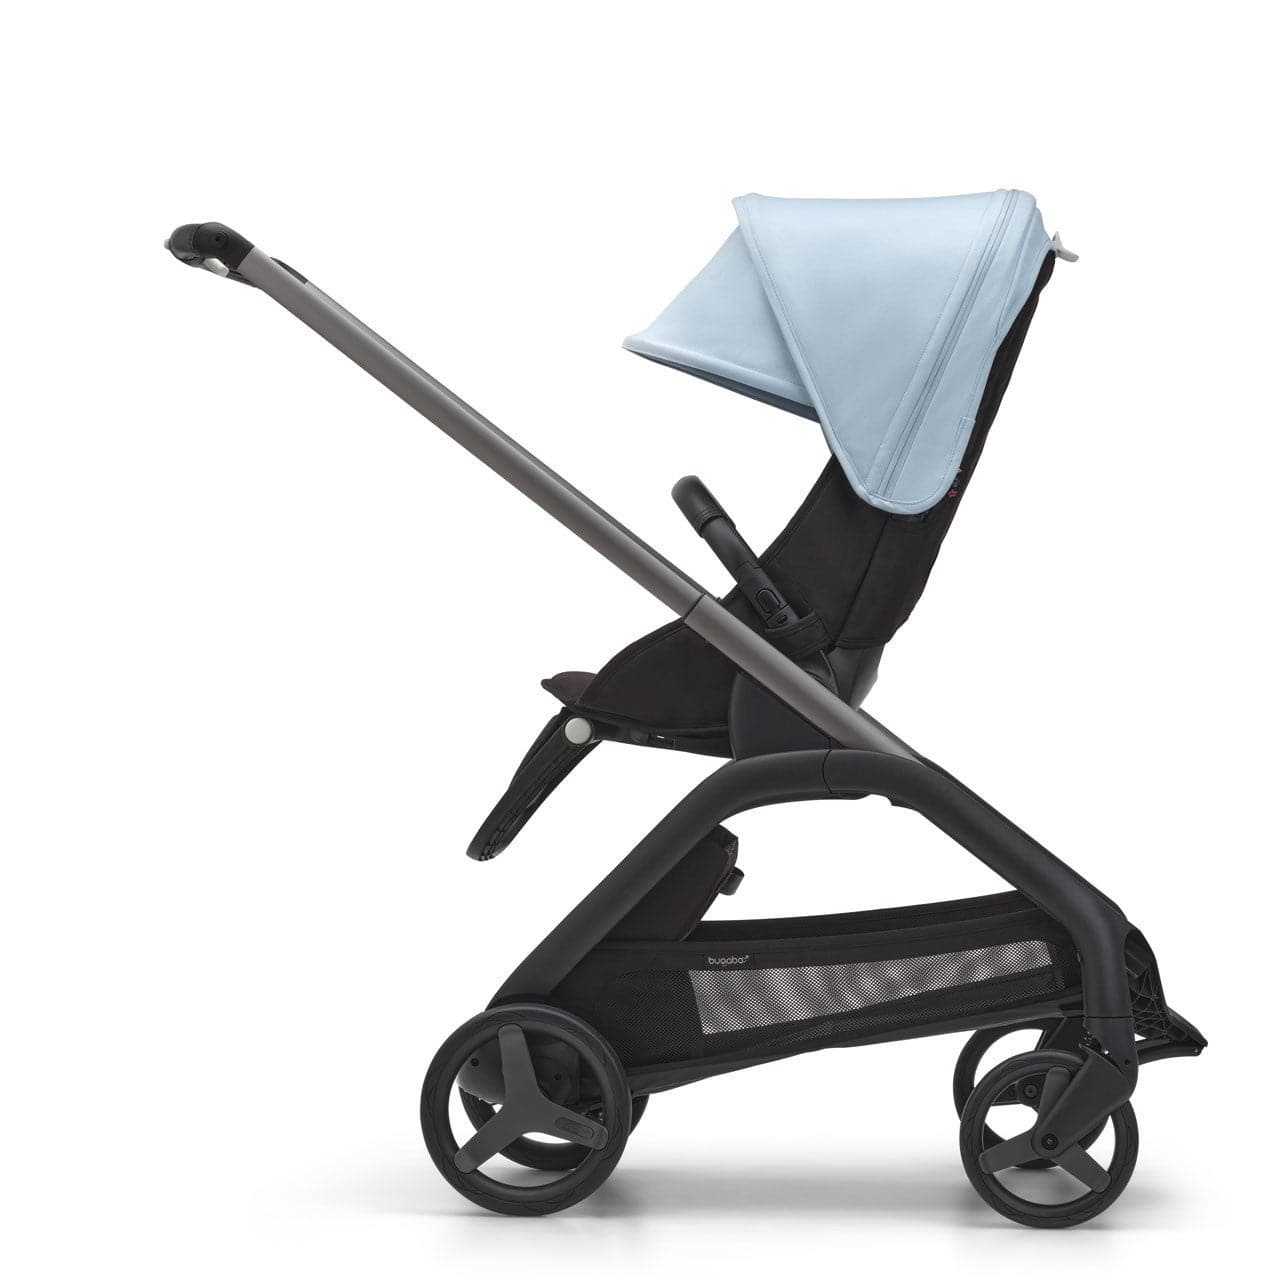 Bugaboo Dragonfly Essential Travel System Bundle - Skyline Blue - For Your Little One